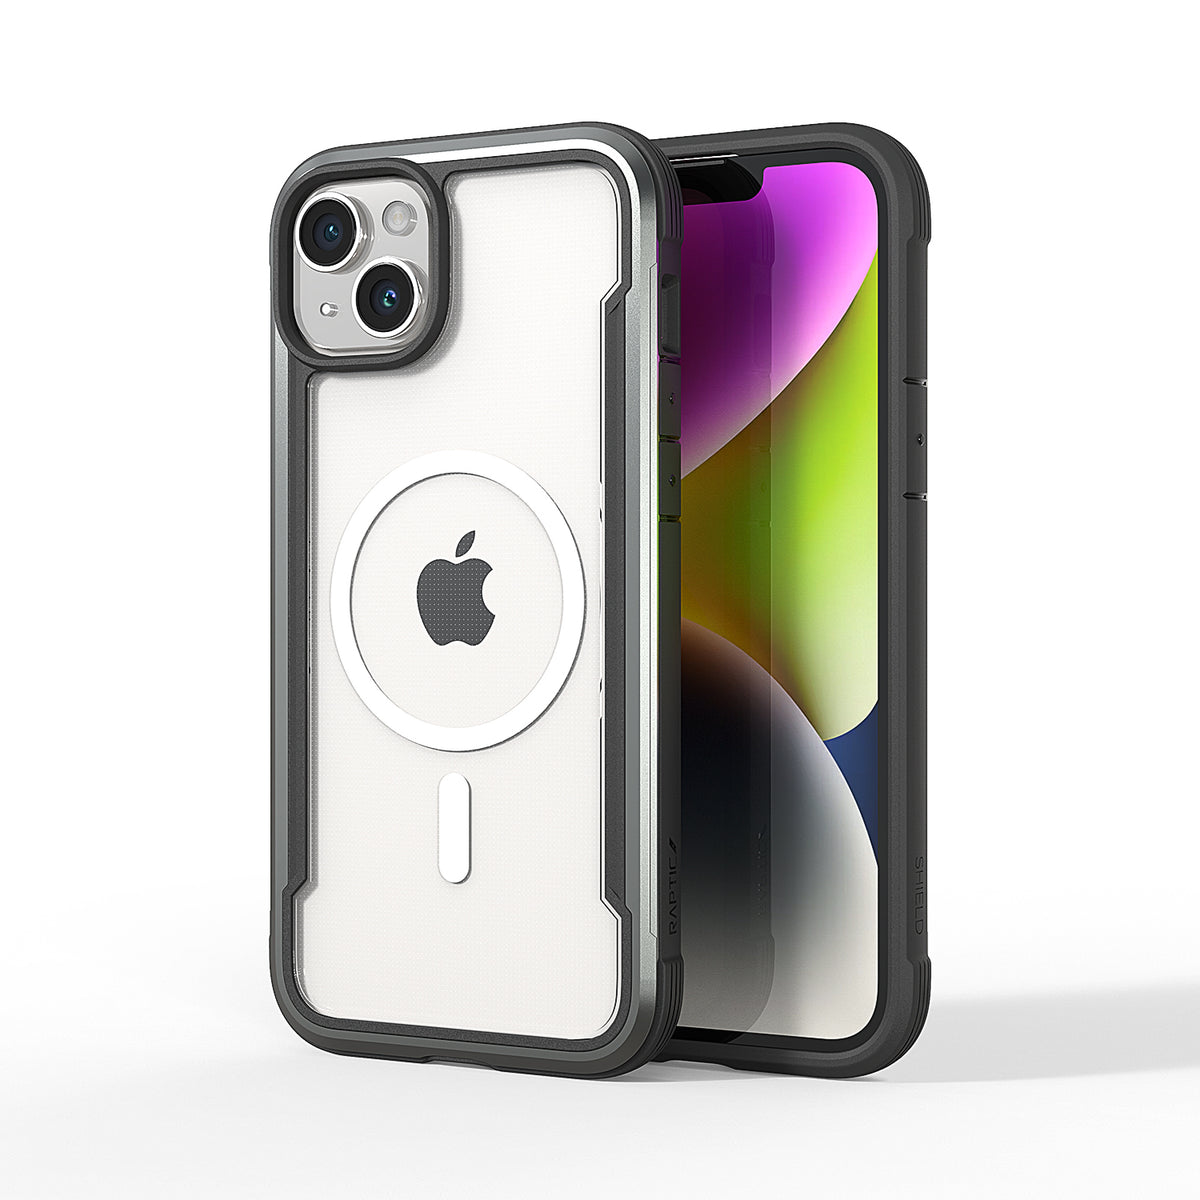 Transparent Raptic iPhone 15 MagSafe Shield case featuring a visible apple logo, black border, and camera cutout with 3-metre drop protection, against a plain white background.